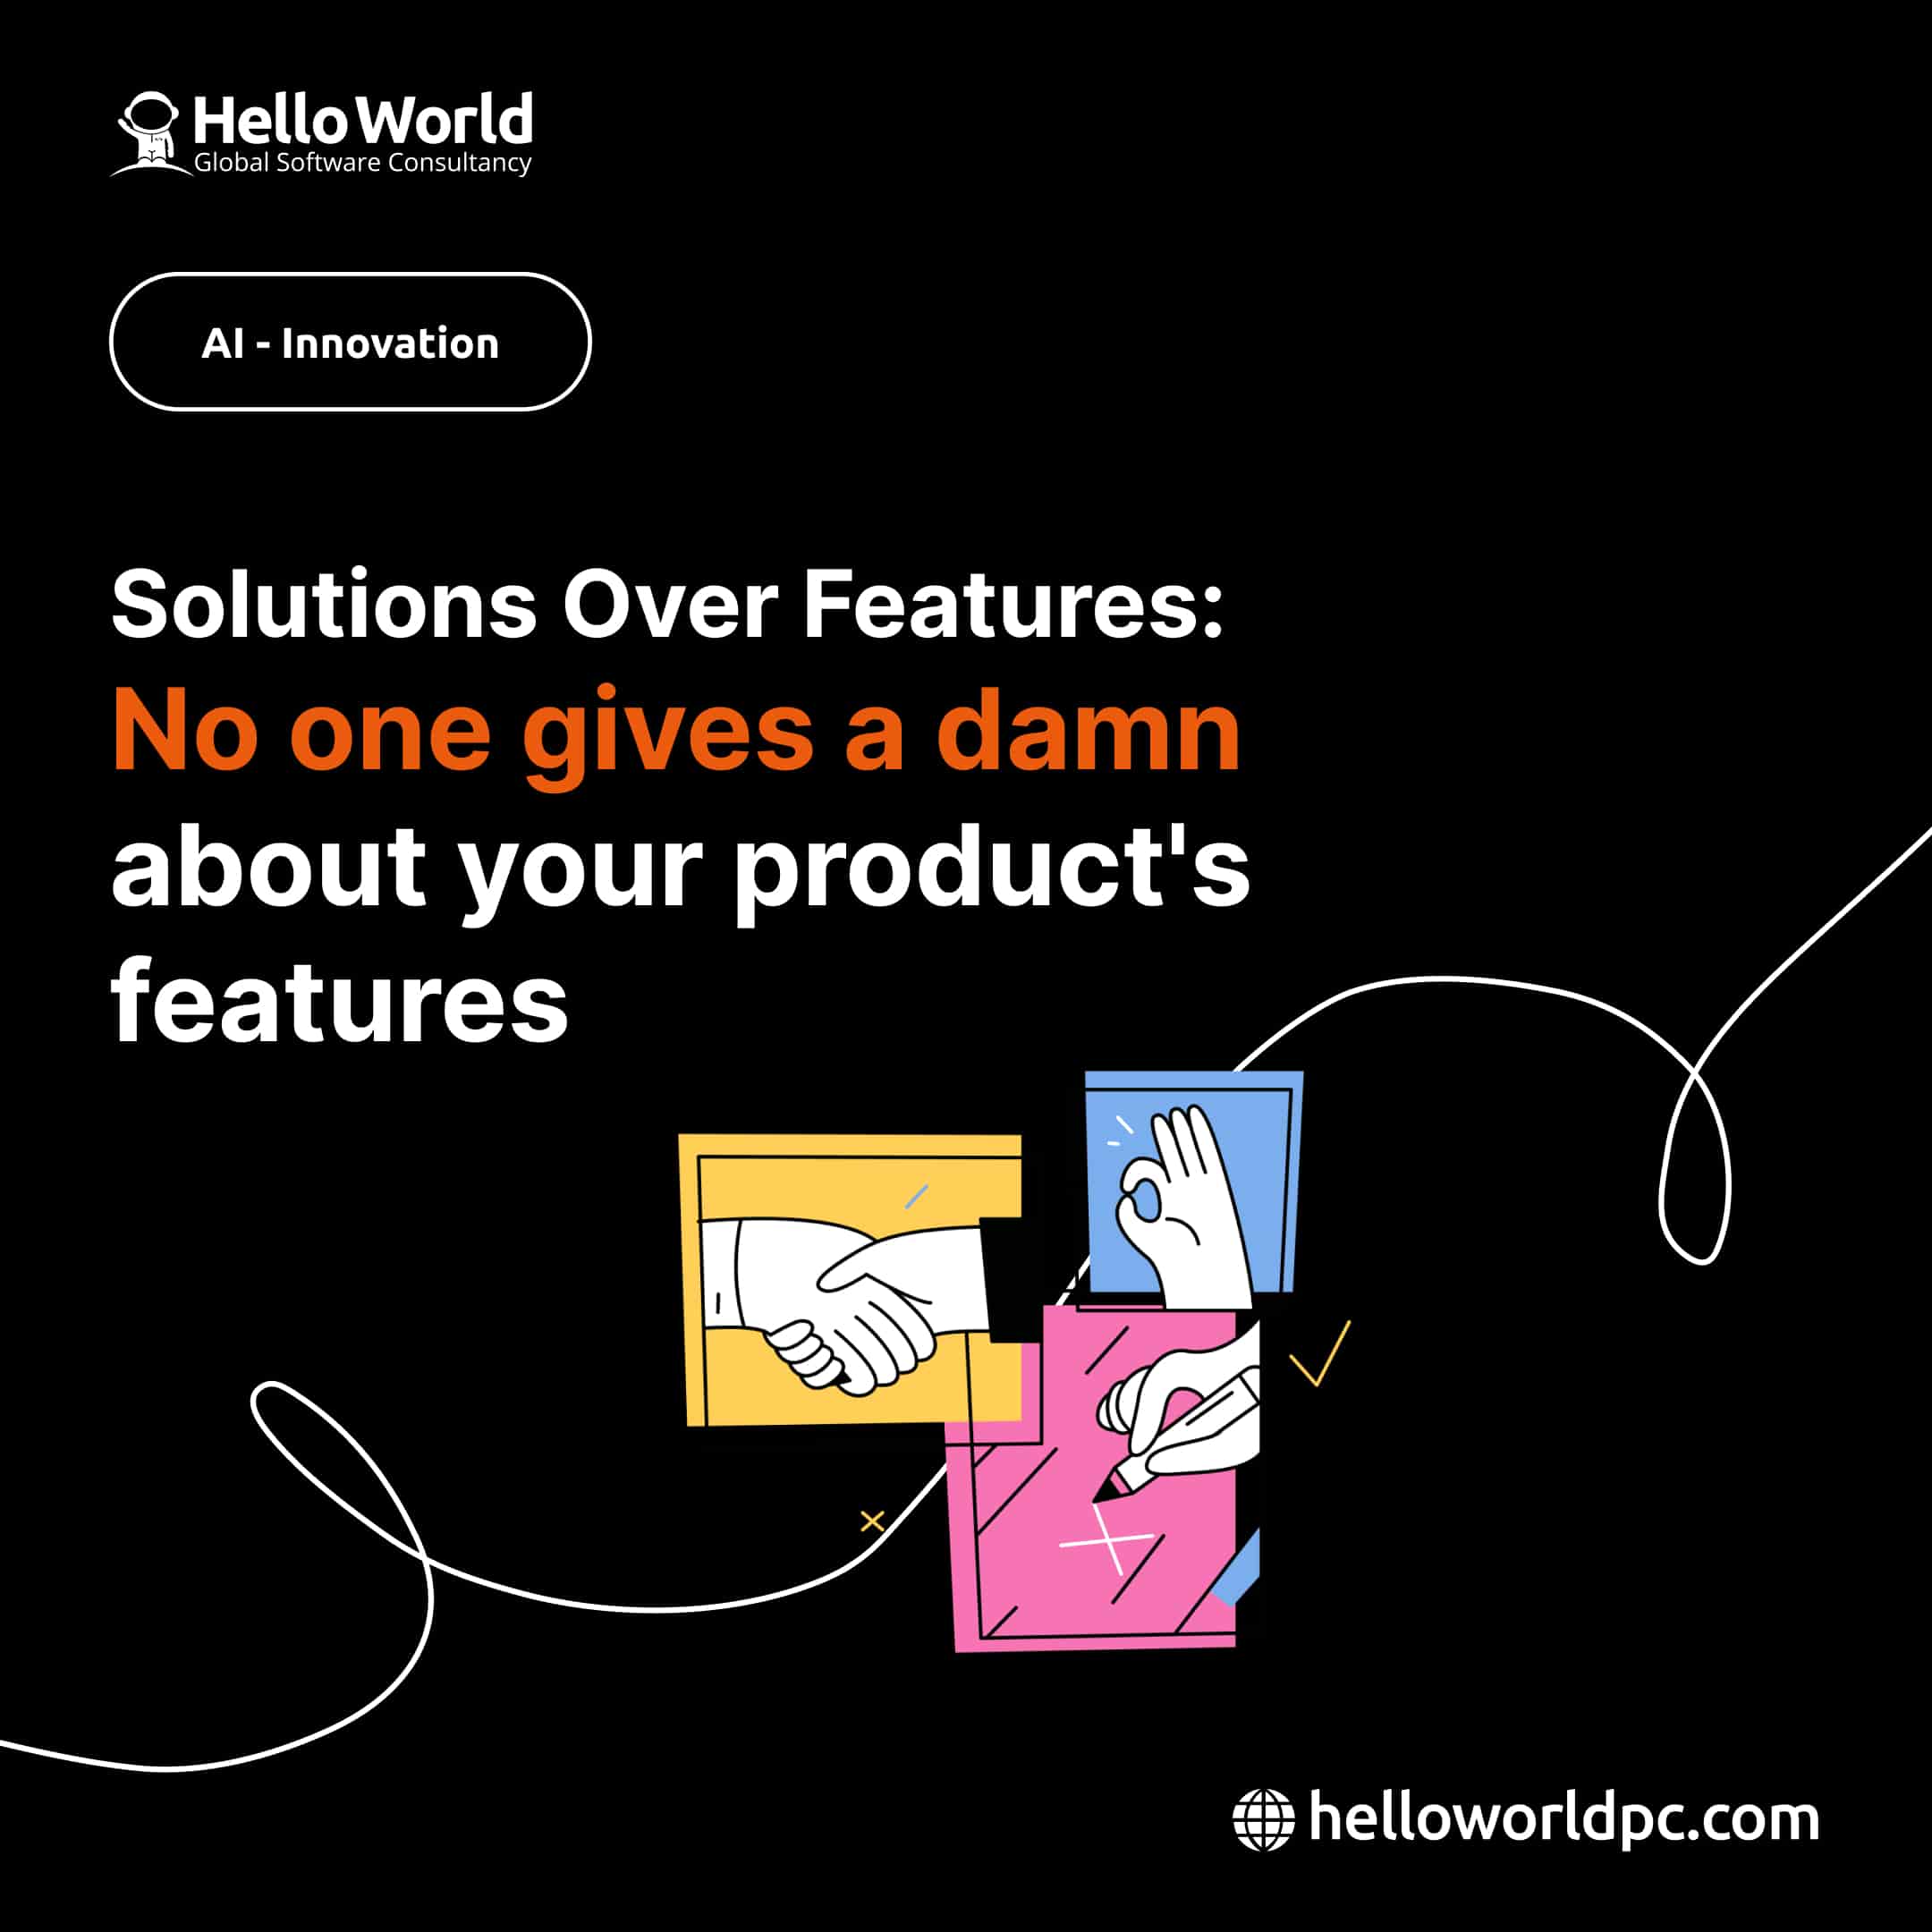 Solutions Over Features: No one gives a damn about your product's features